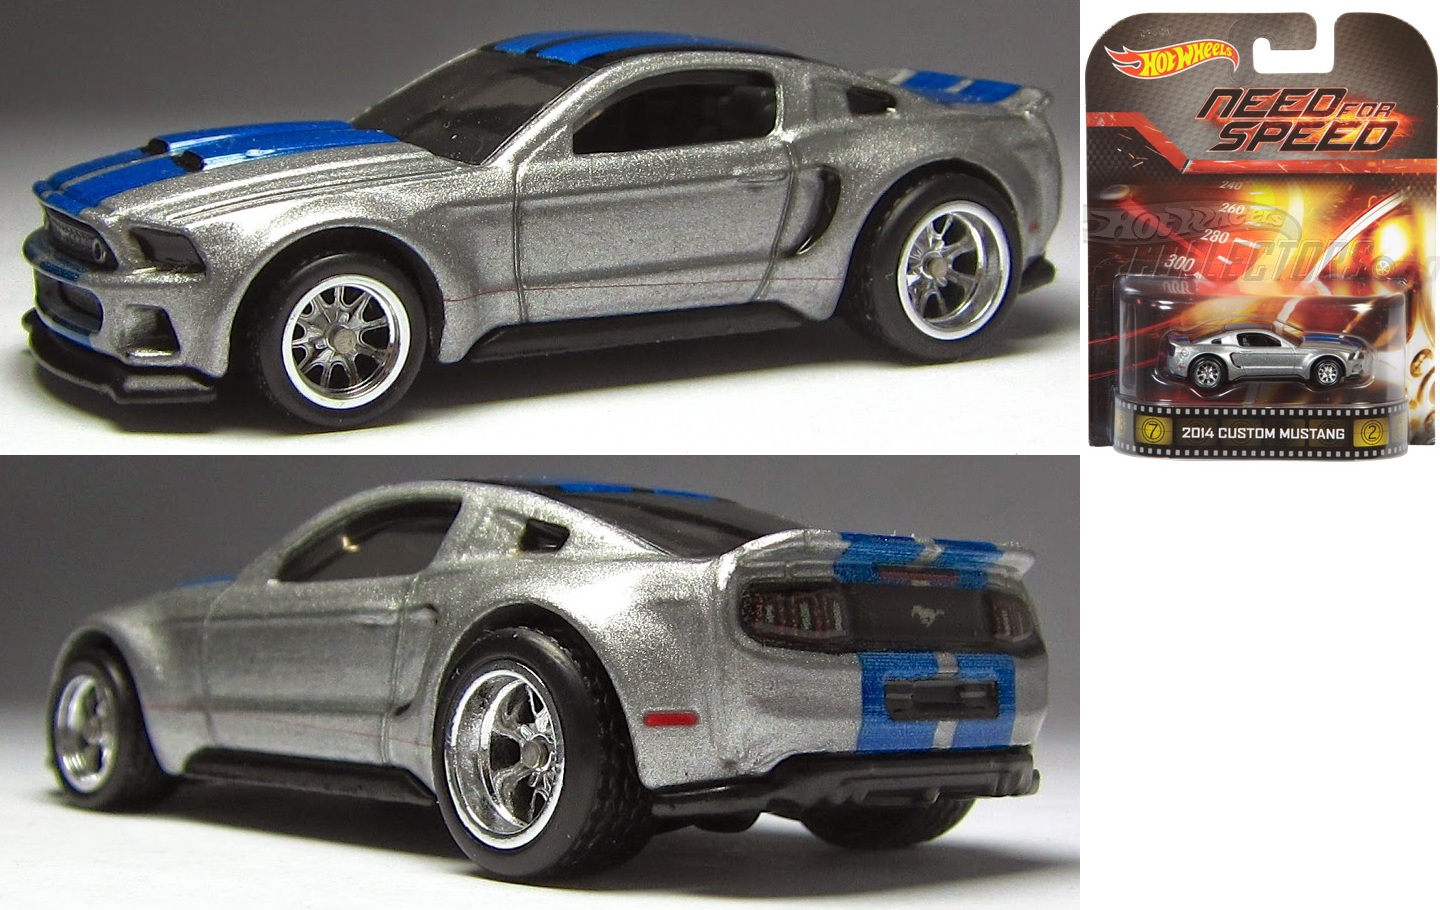 Ford Mustang Mach 1 Hot Wheels.